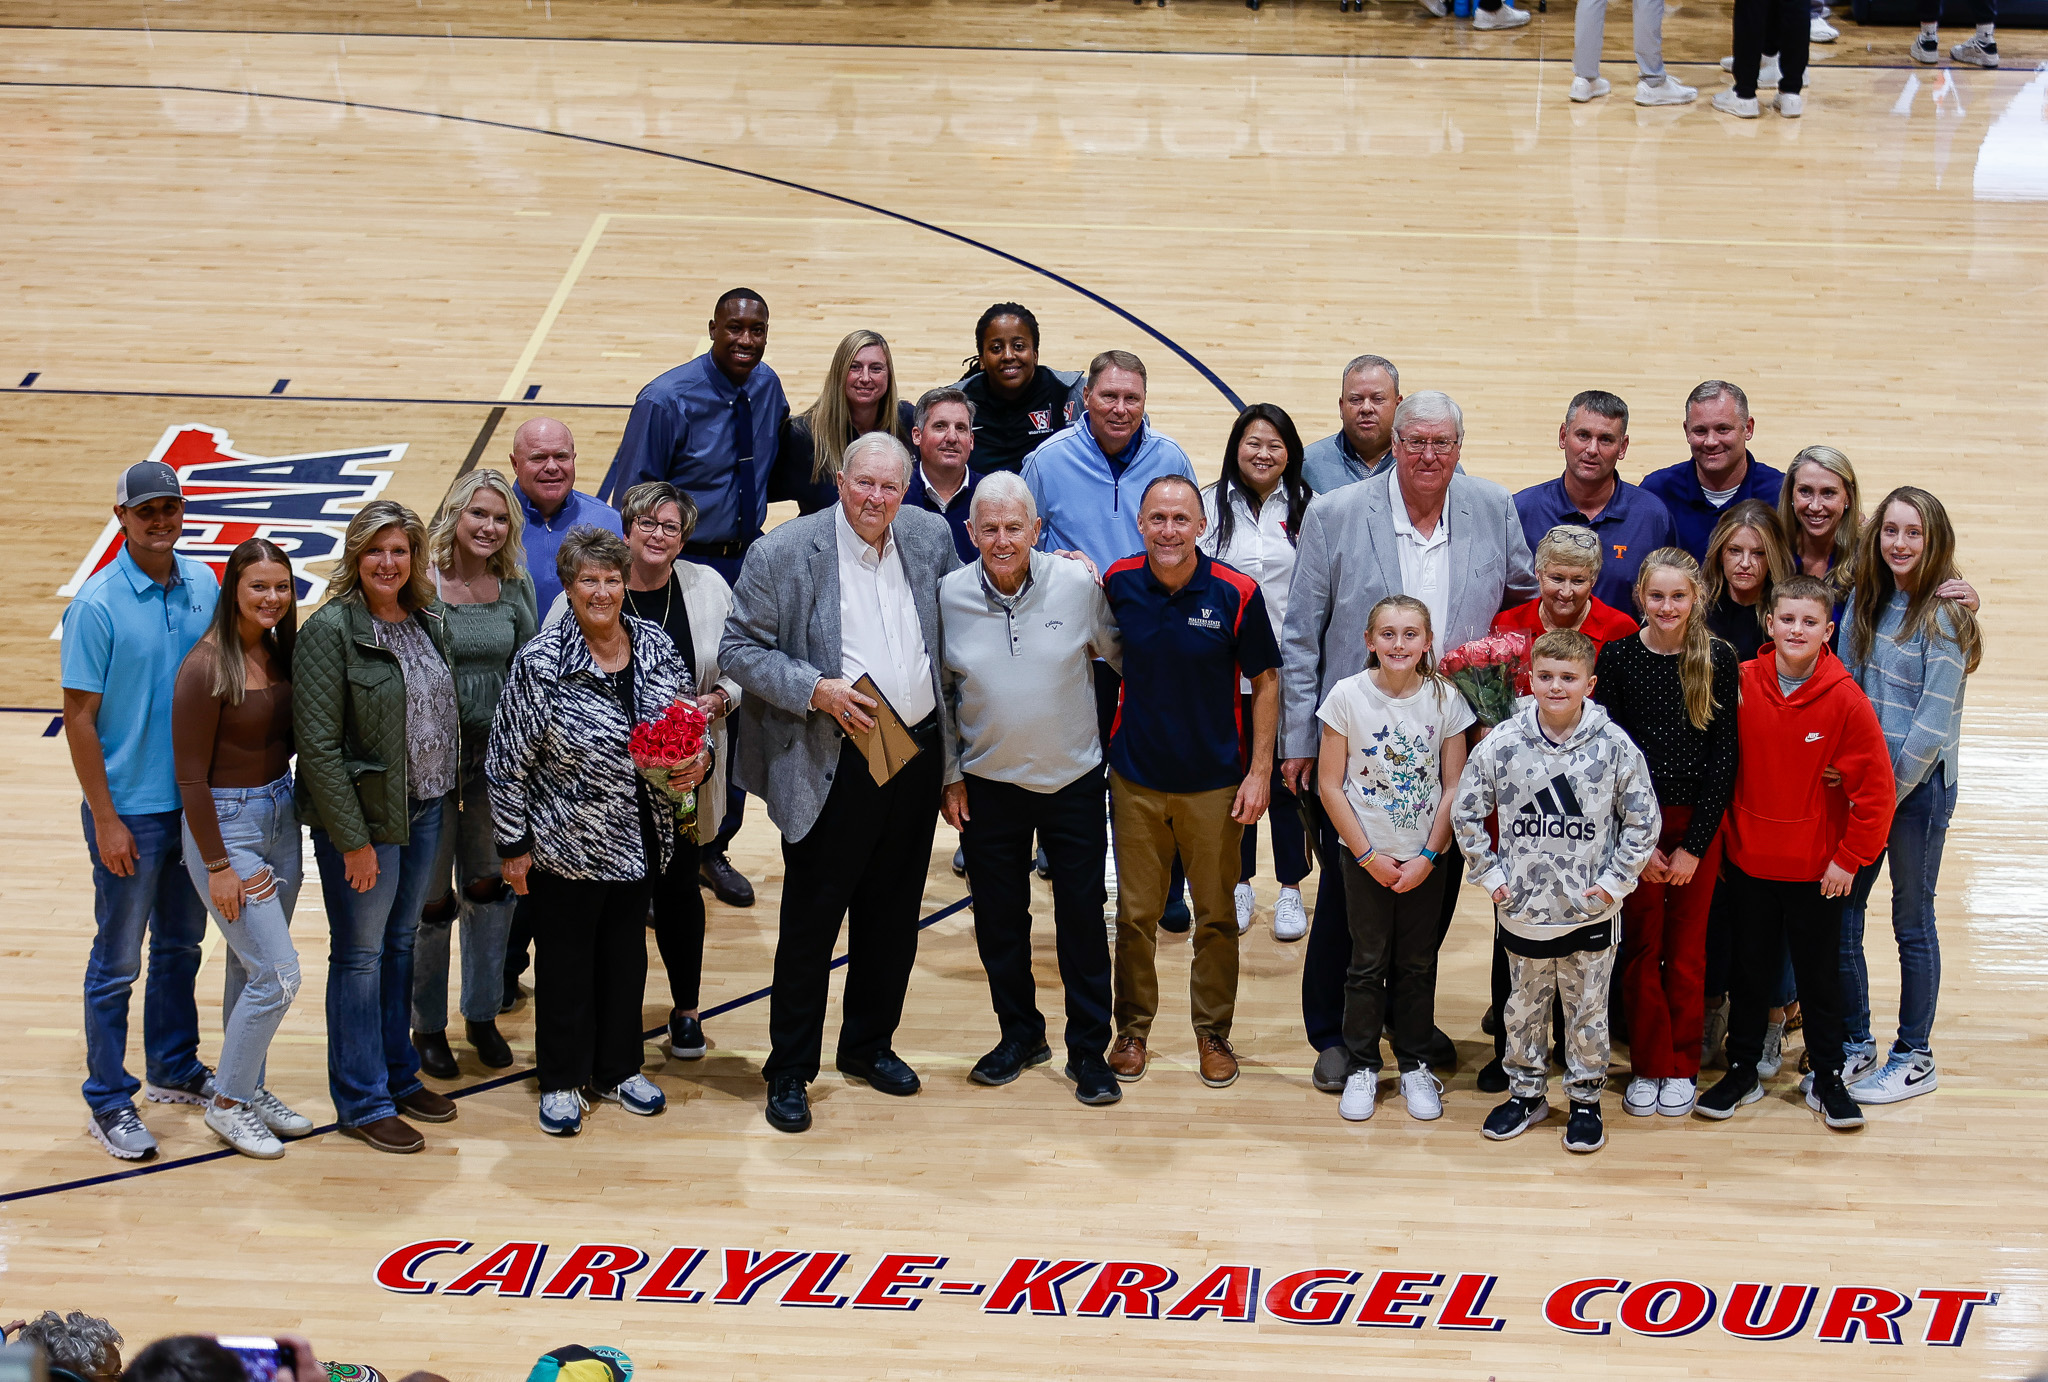 Legendary coaches Bill Carlyle and Dave Kragel honored with naming of Carlyle-Kragel Court